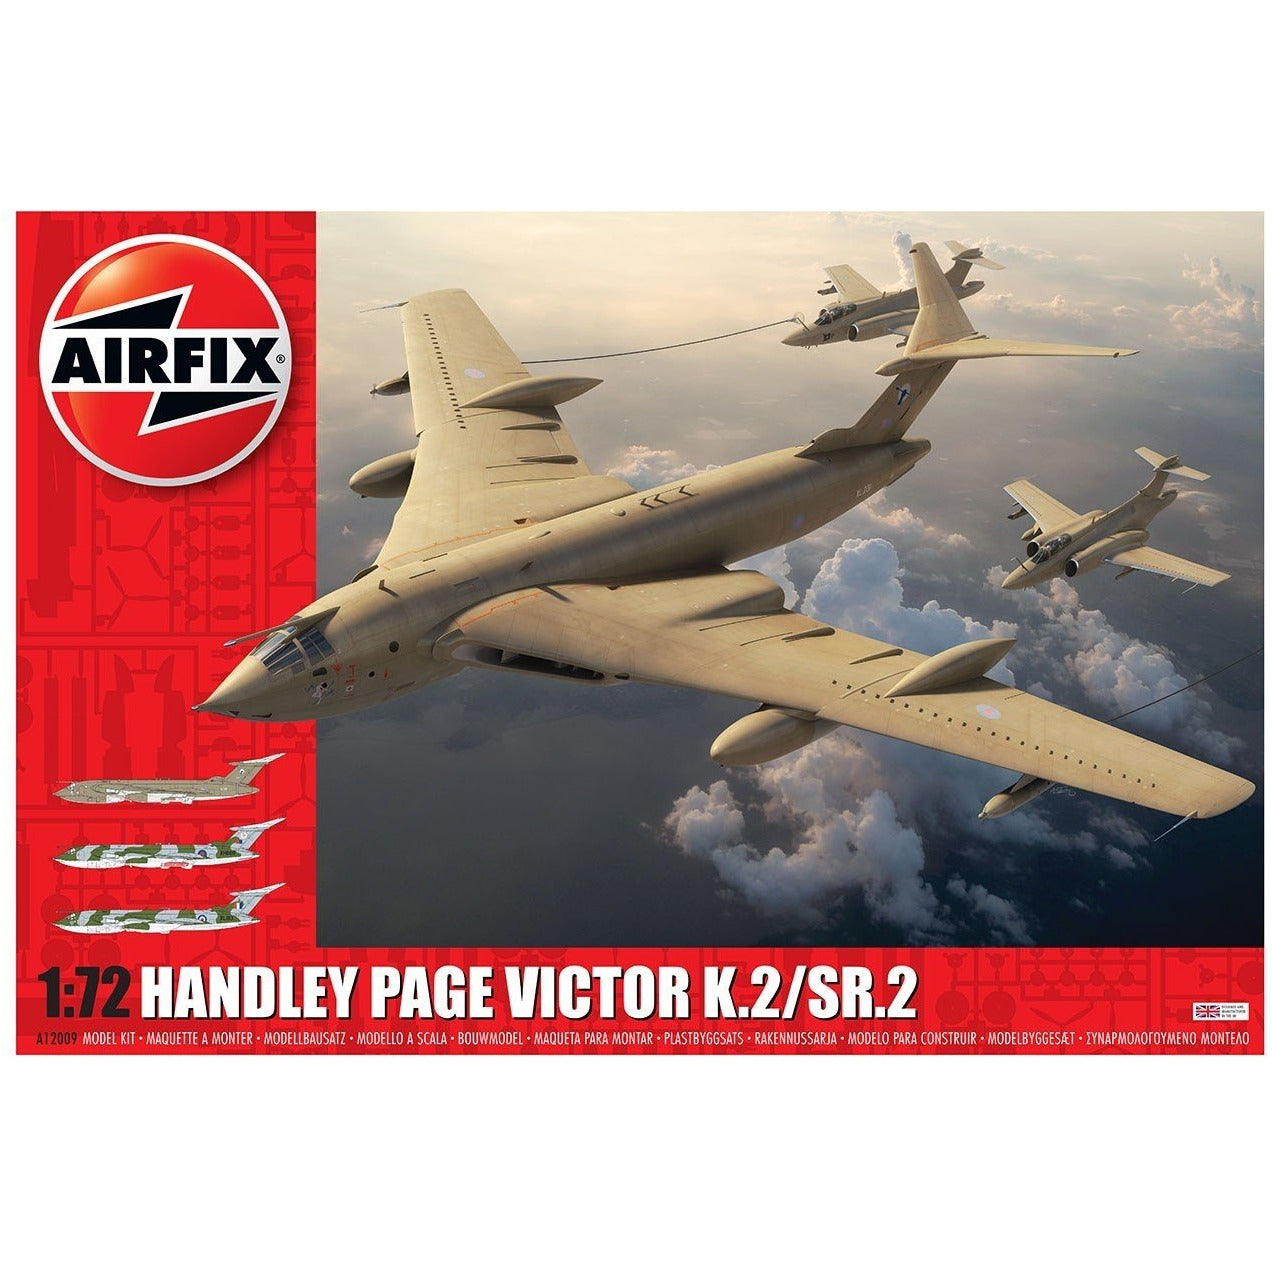 Handley Page Victor K.2 1/72 by Airfix